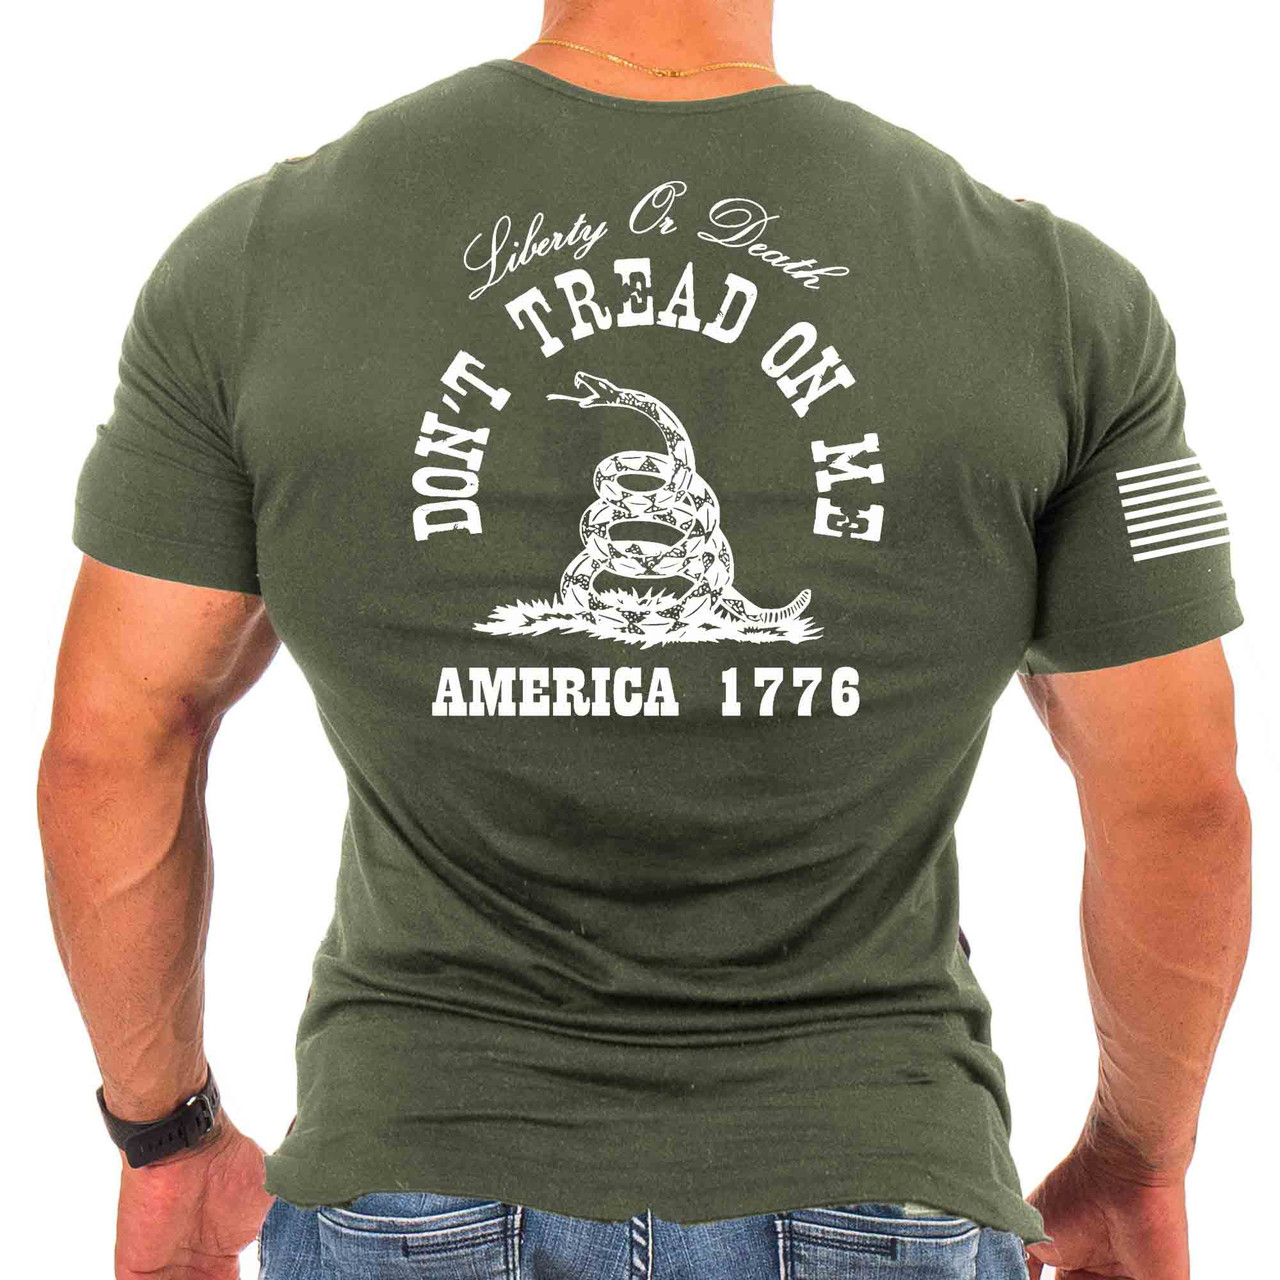 Don't Tread On Me Sleeveless Shirt with Liberty or Death America 1776 ...